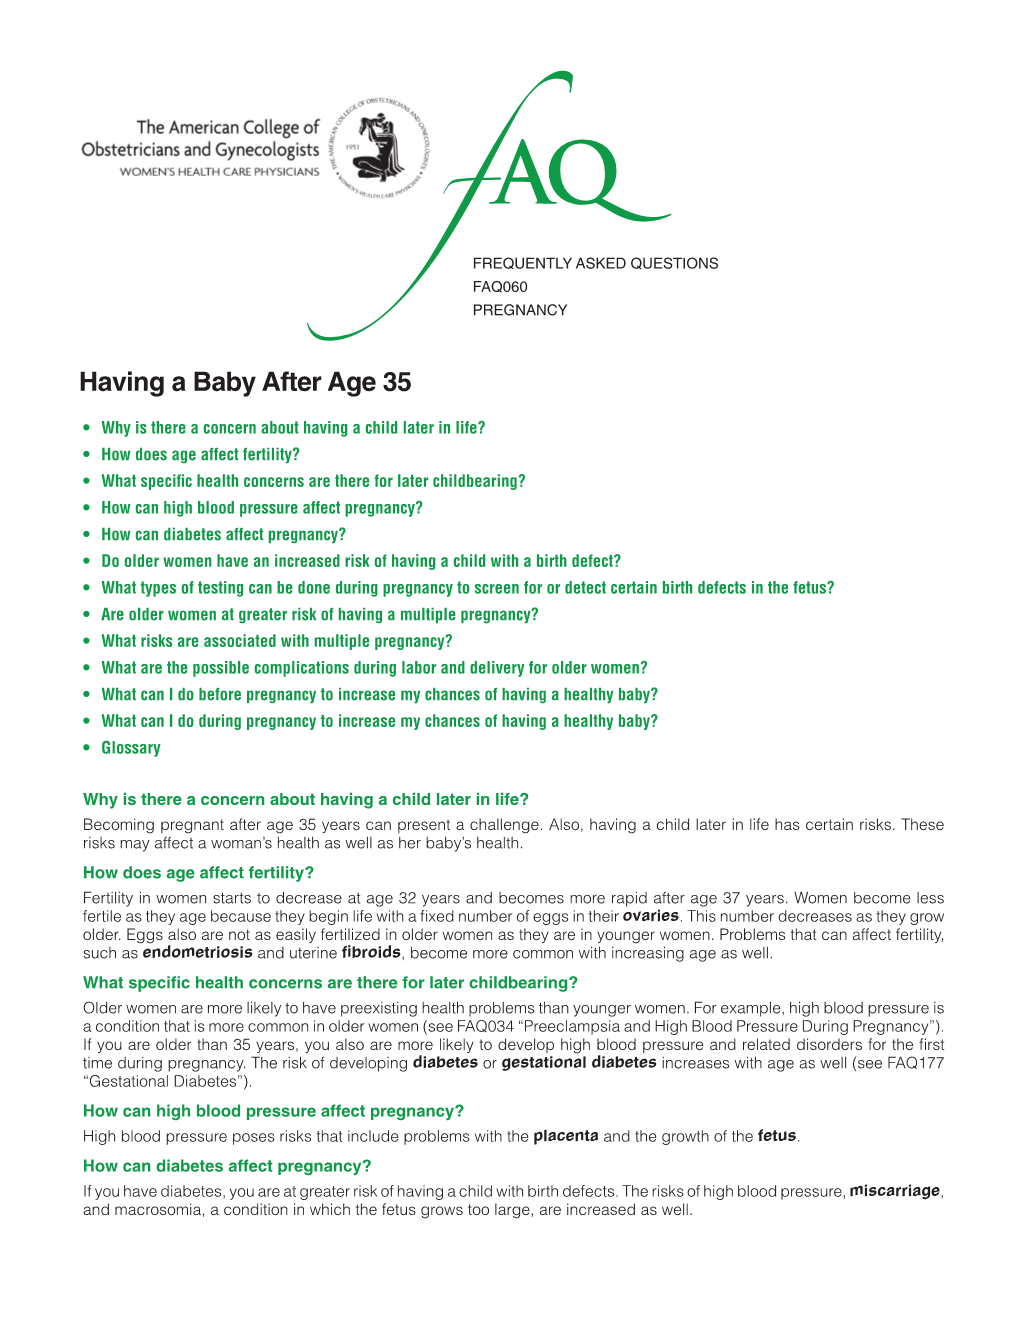 FAQ060 -- Having a Baby After Age 35